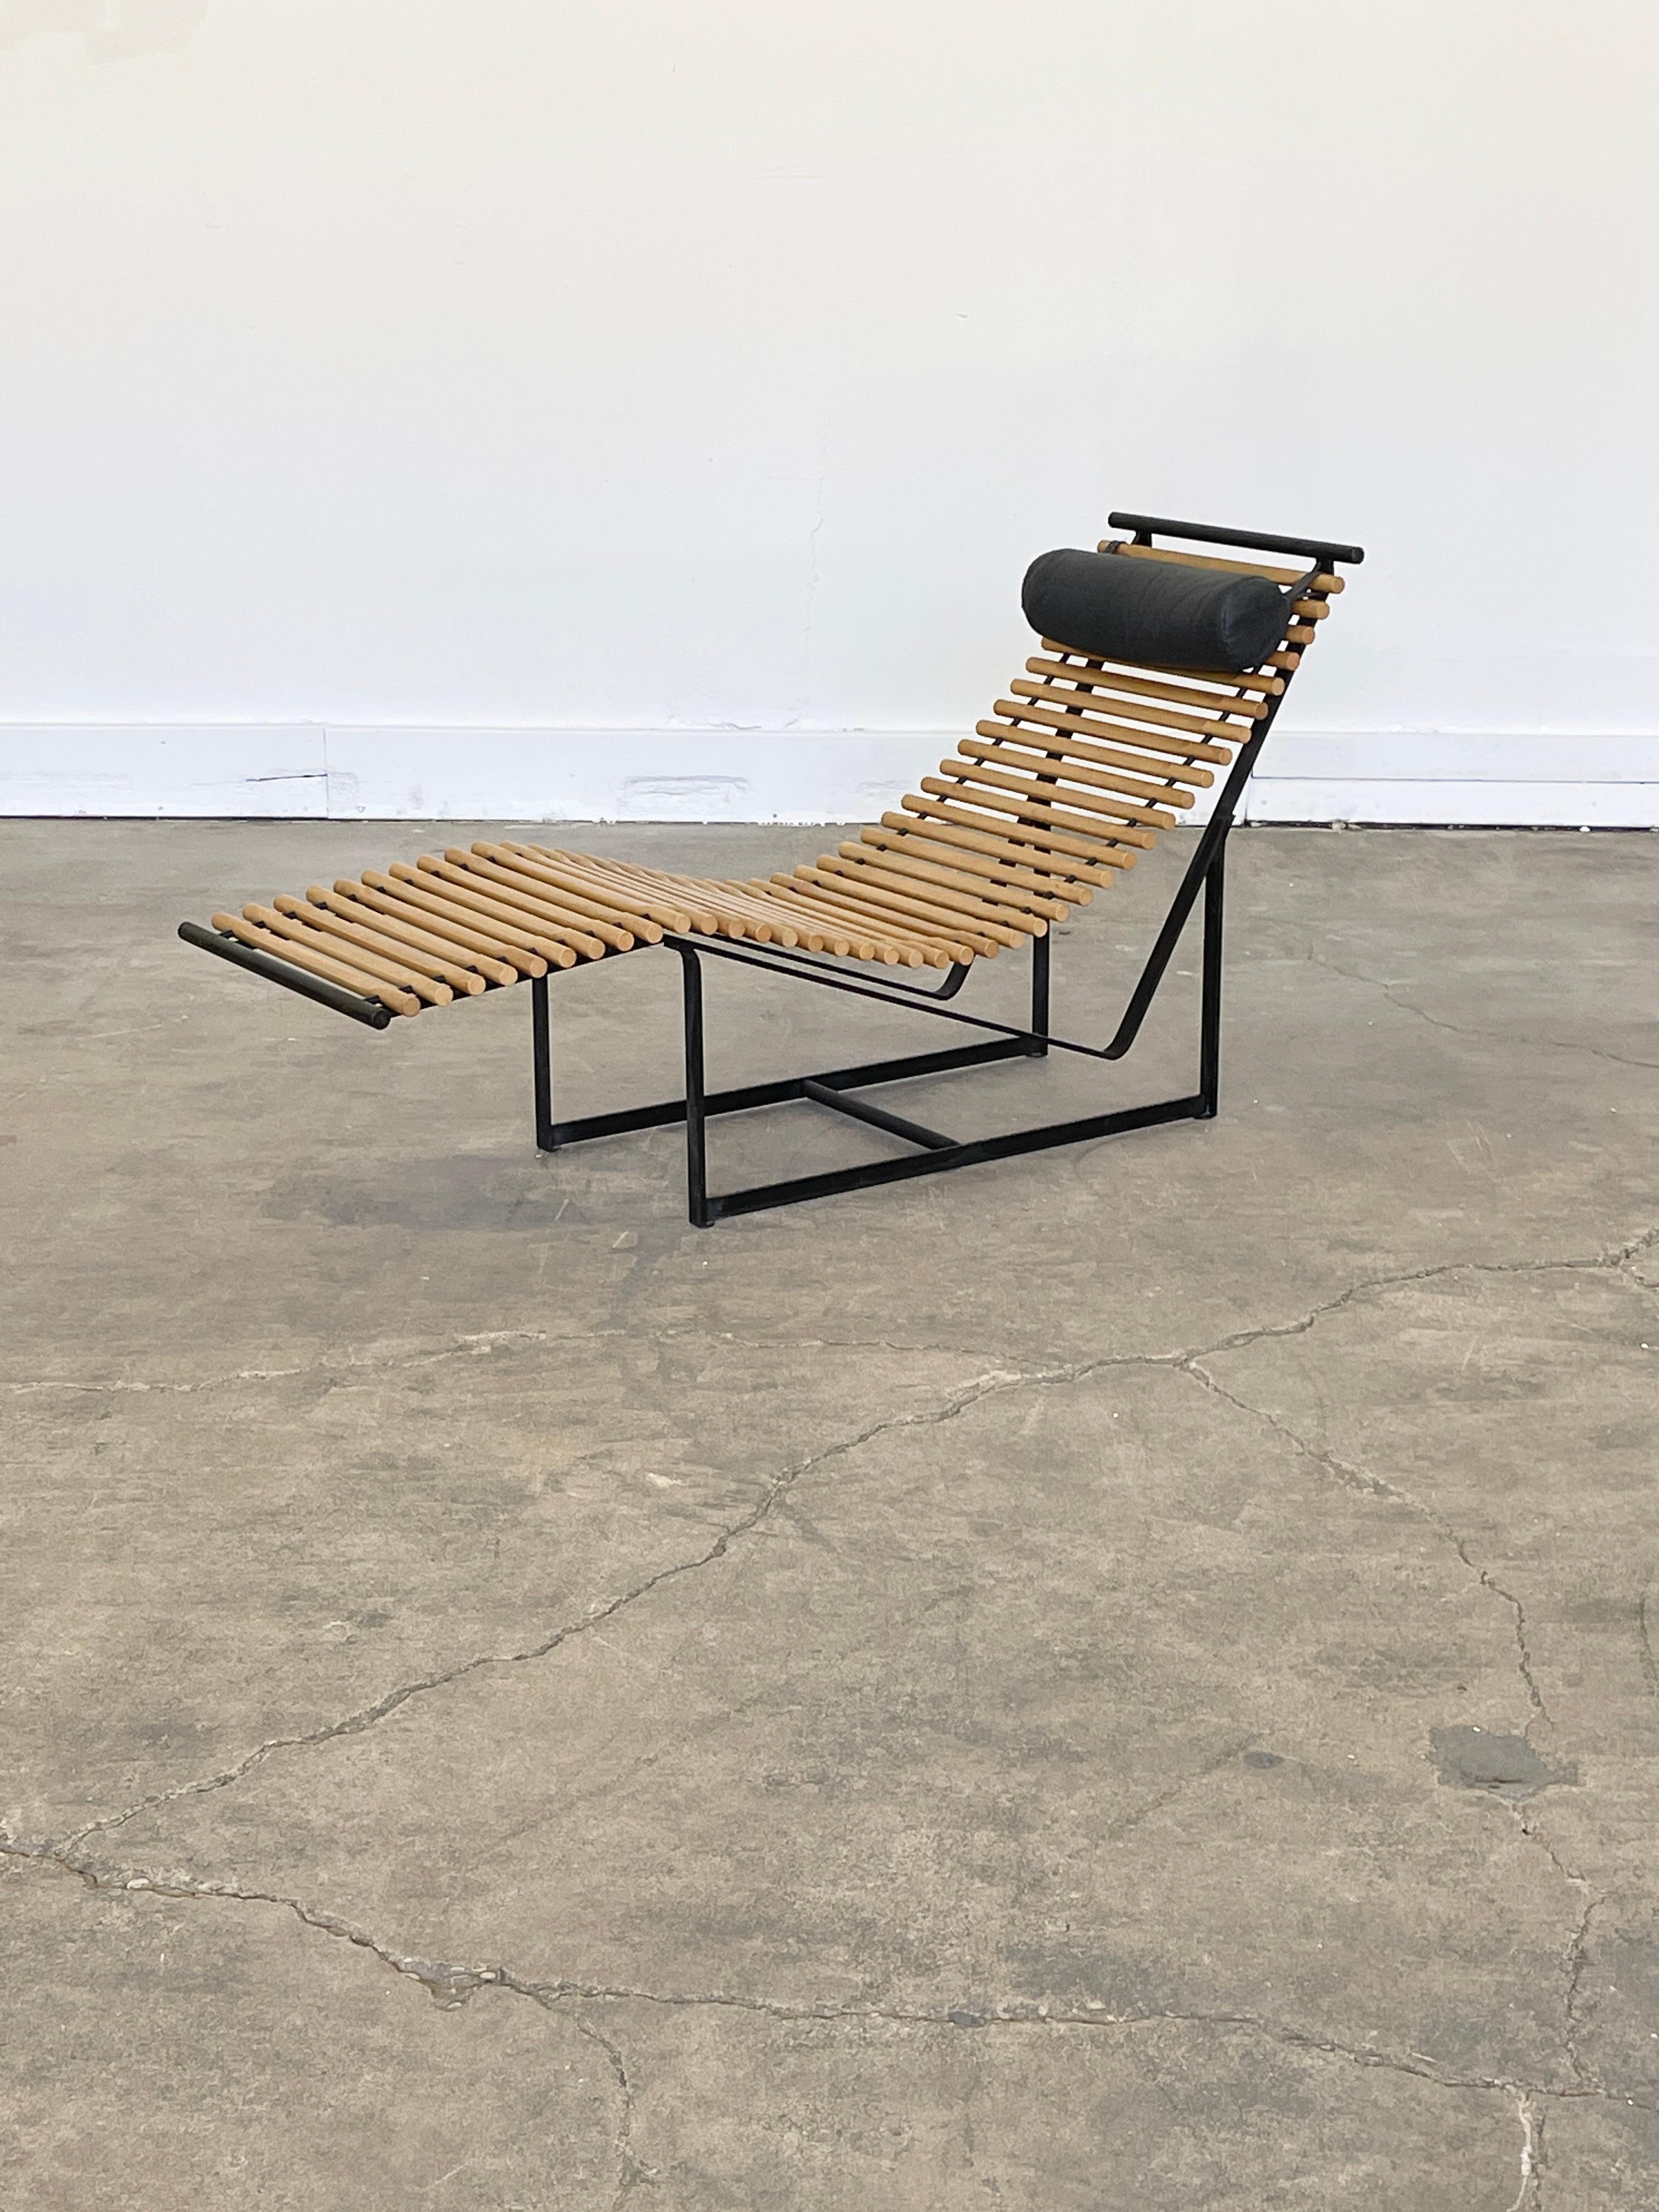 Enameled Sculptural Chaise Lounge Chair by Peter Strassl, 1978 For Sale